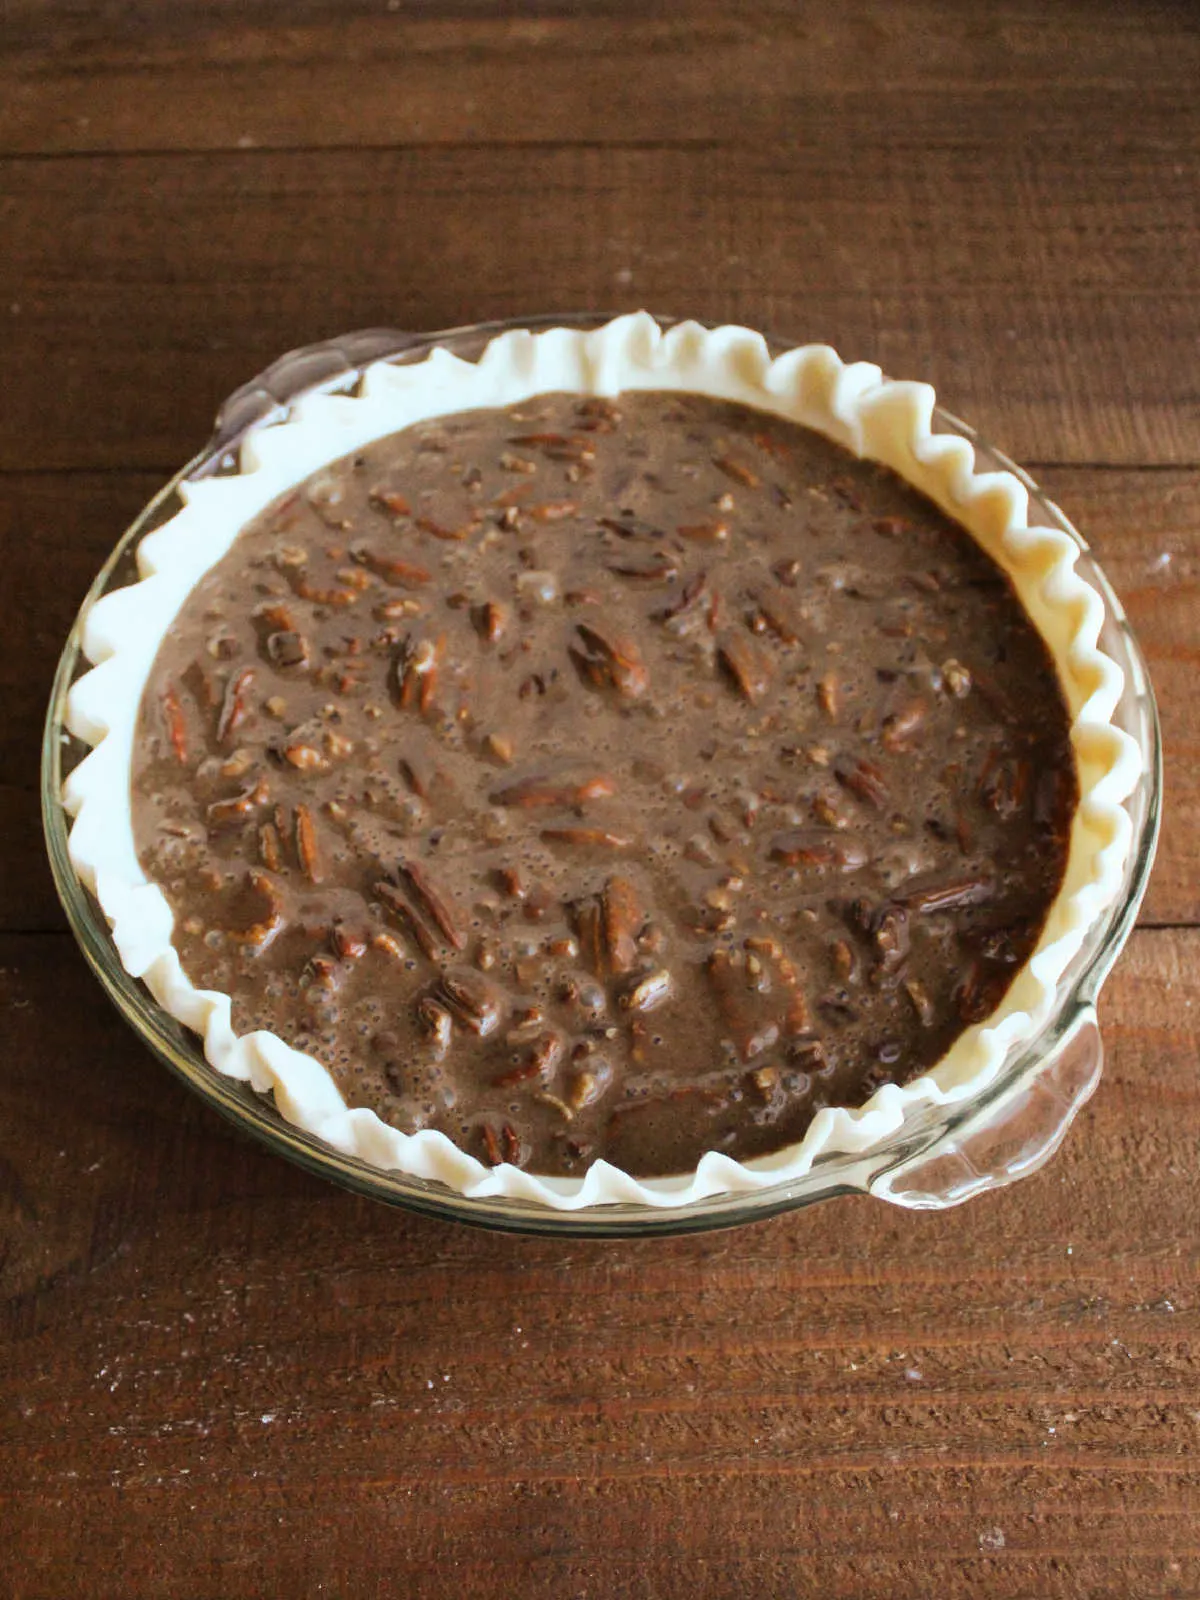 Chocolate condensed milk pie, ready to go in the oven.